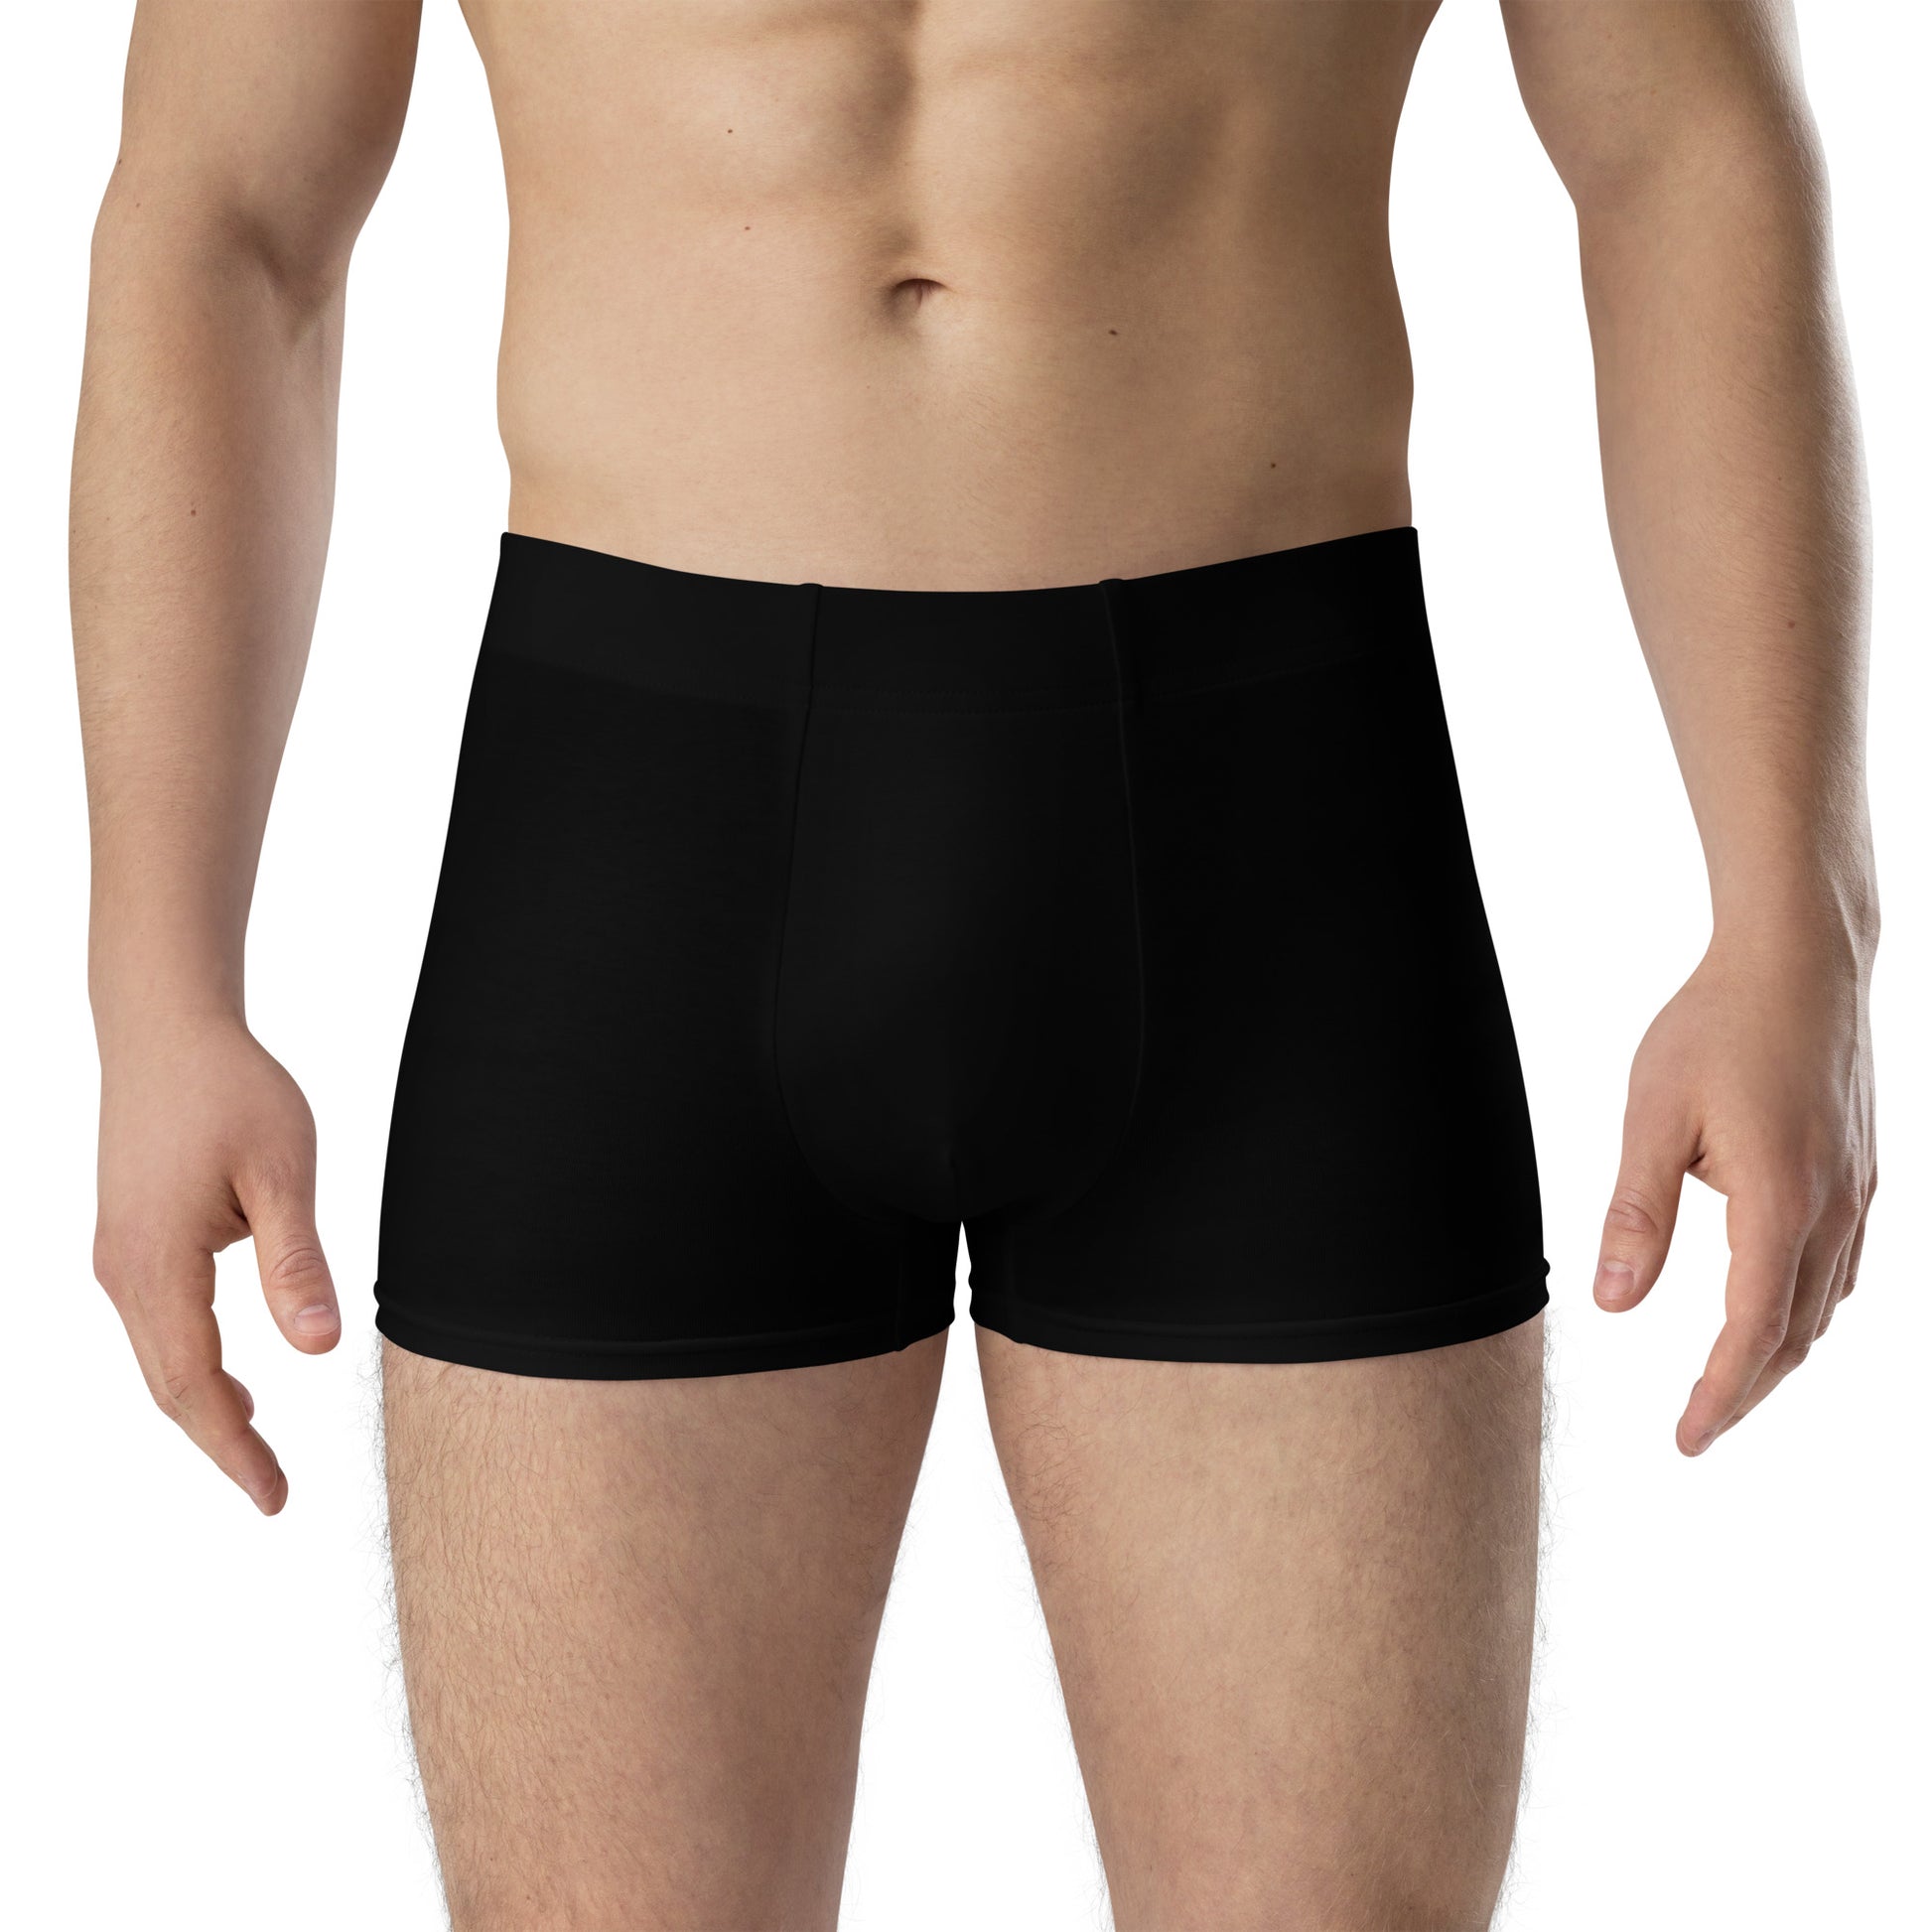 New and used Men's Boxer Briefs for sale